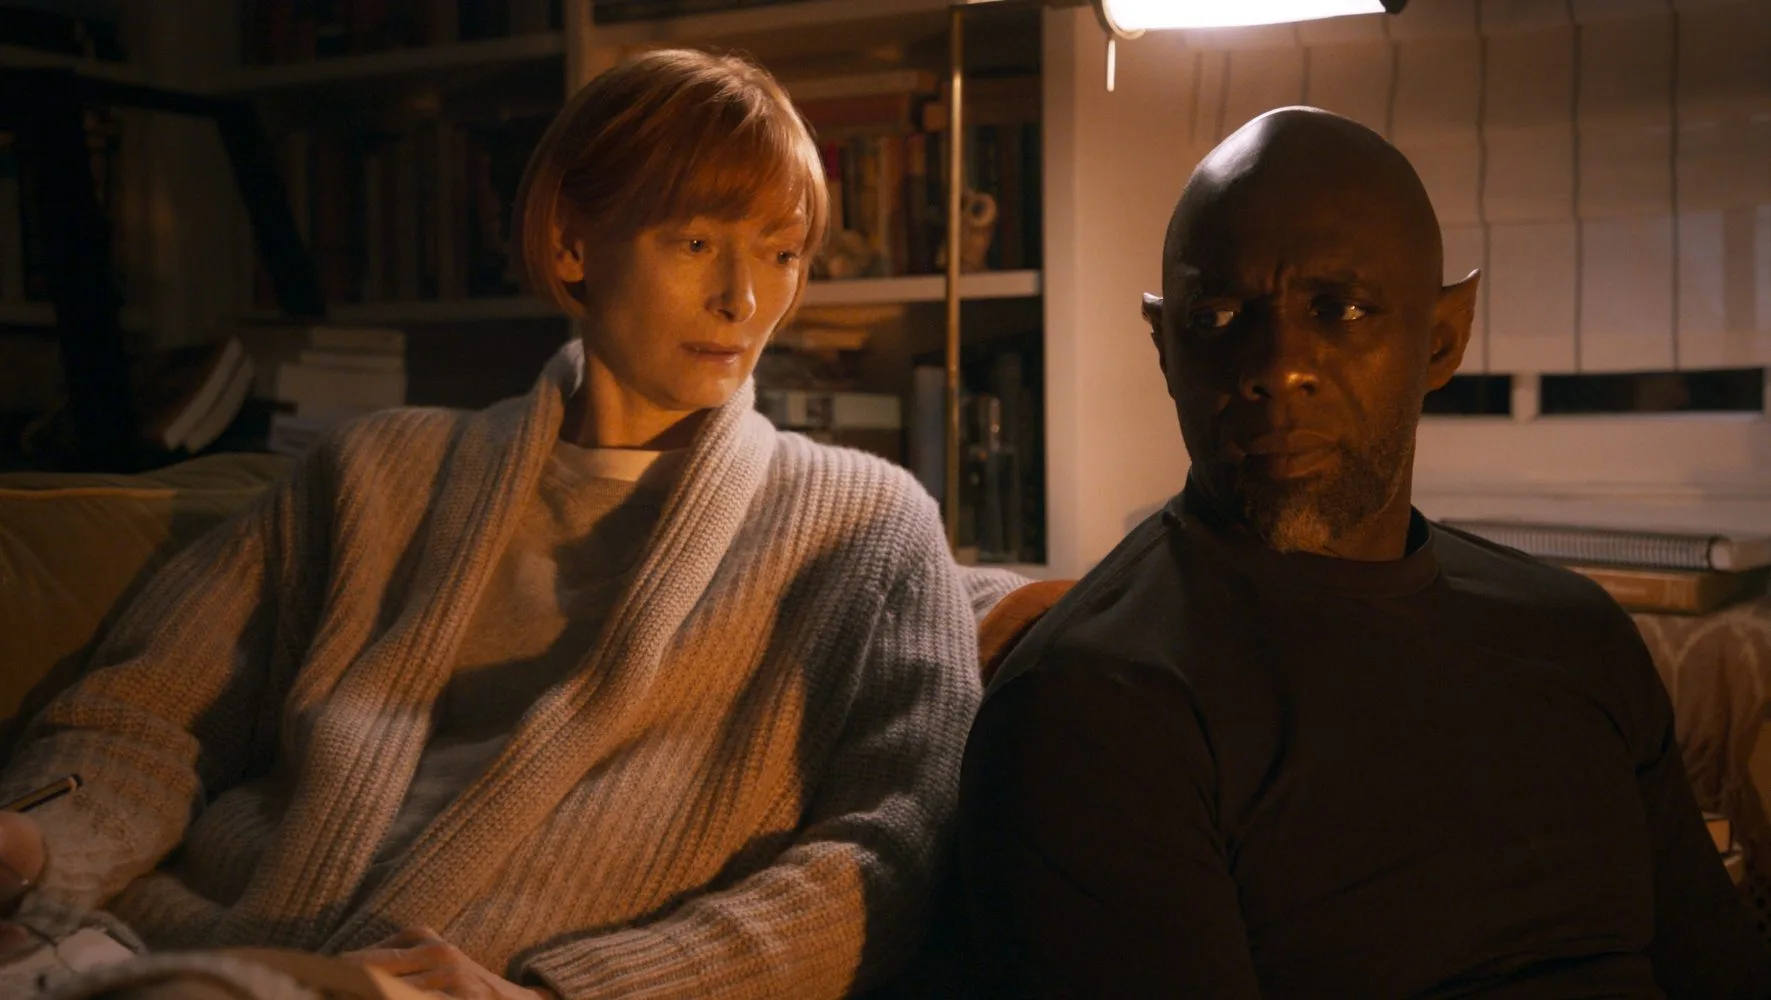 From left, Tilda Swinton and Idris Elba star as strangers who find a connection in a new George Miller epic all about love.